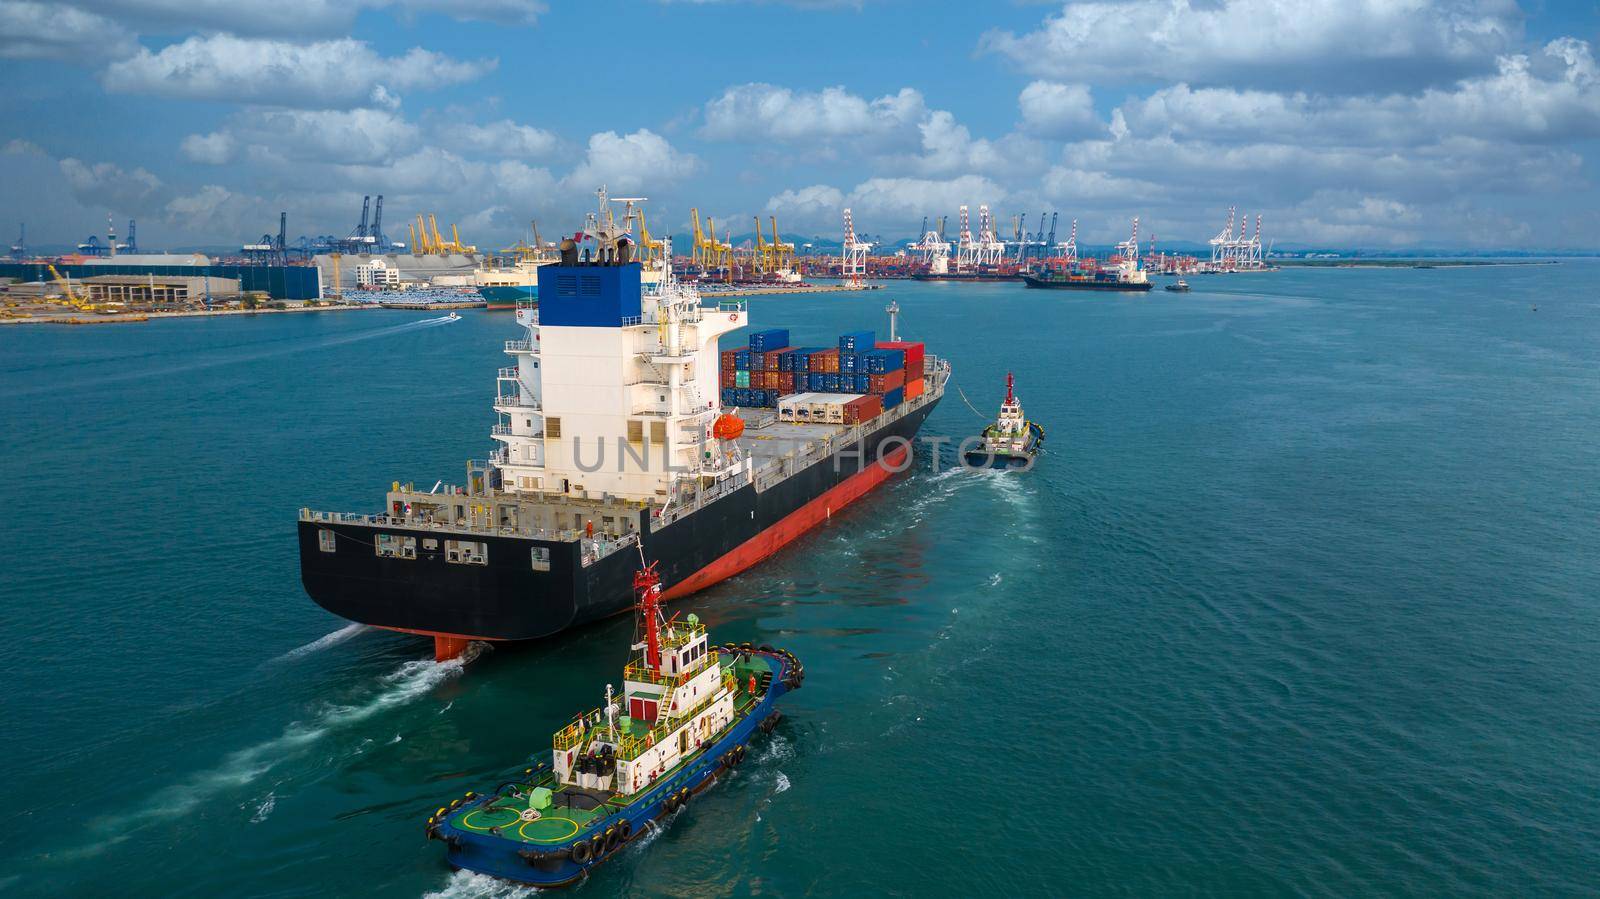 Container ship carrying container box in import export to commercial port, Global business cargo freight shipping commercial trade logistic and transportation oversea worldwide by container vessel.